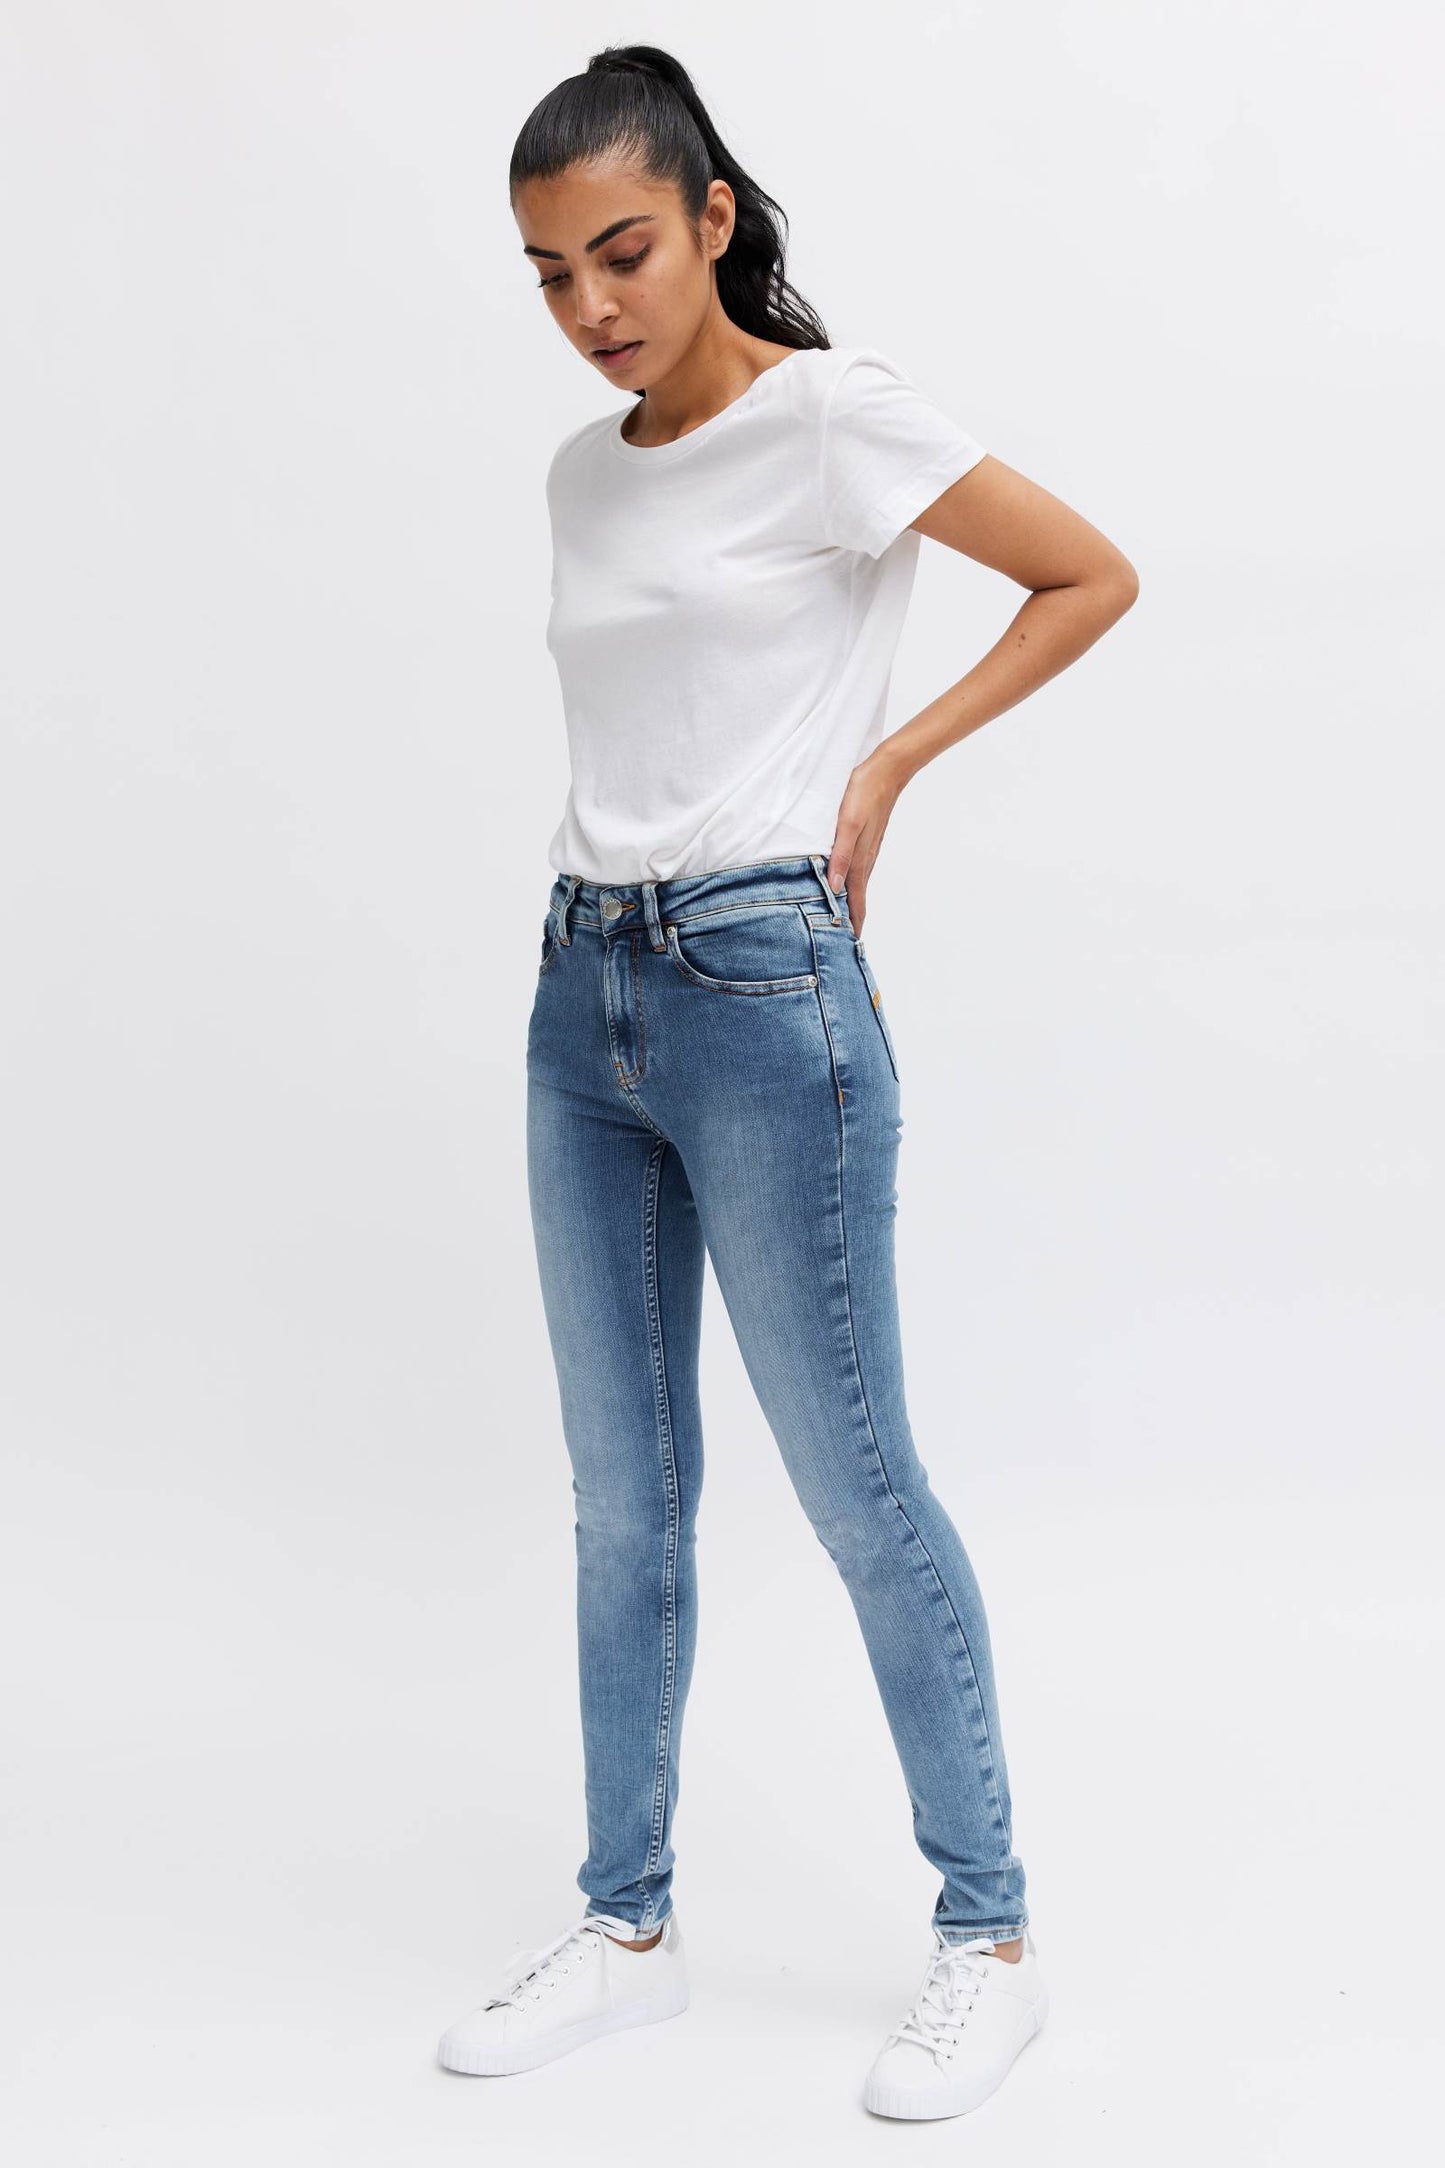 Organic cotton stretch pants &  jeans - The perfect fit